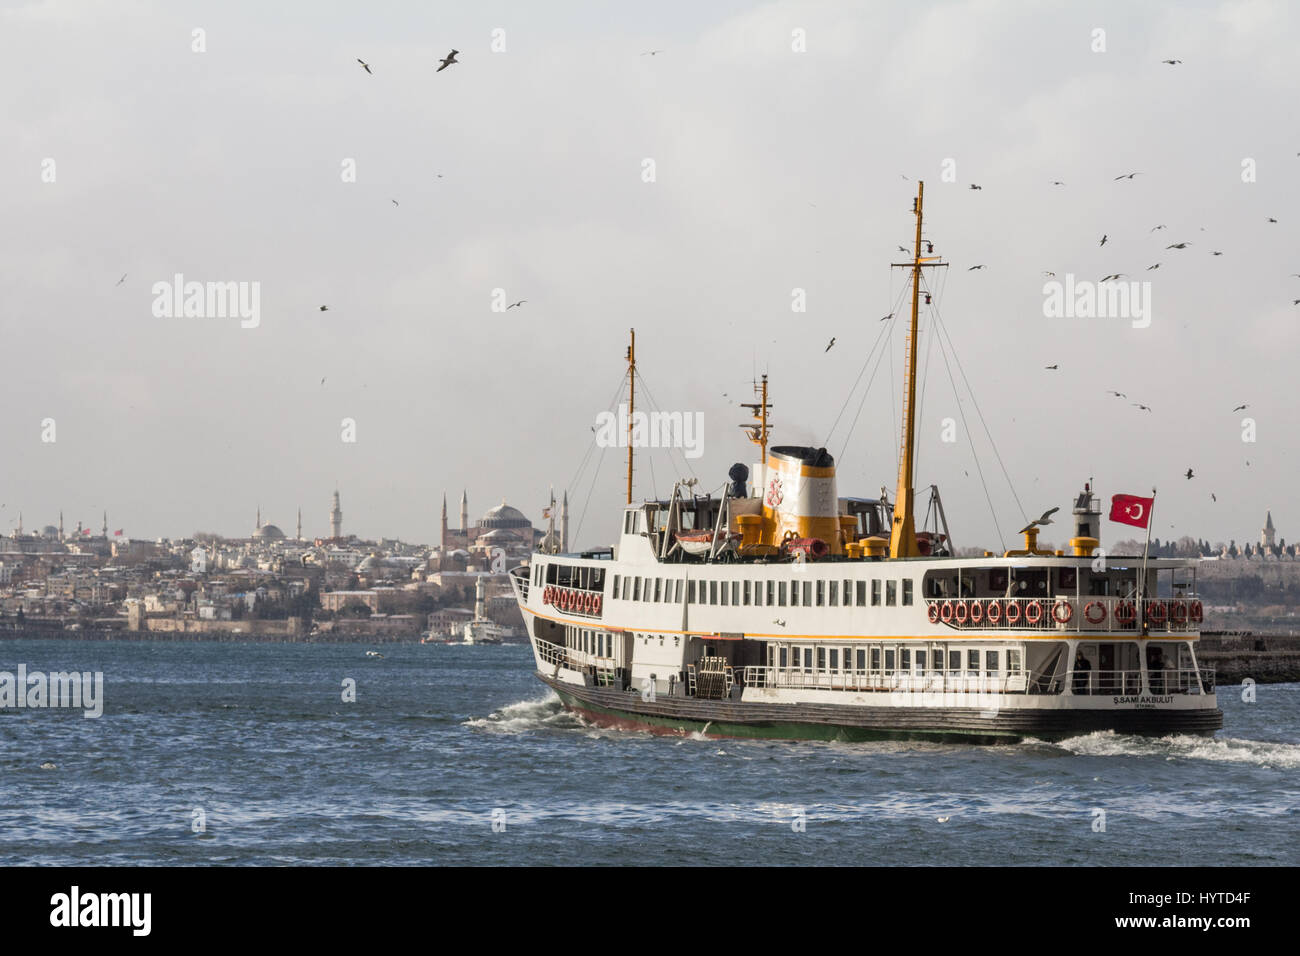 ISTANBUL, TURKEY - DECEMBER 30, 2015: Ferry leaving the port of Kadikoy district, Asian side of the city, heading to the European side, Ayasofya mosqu Stock Photo